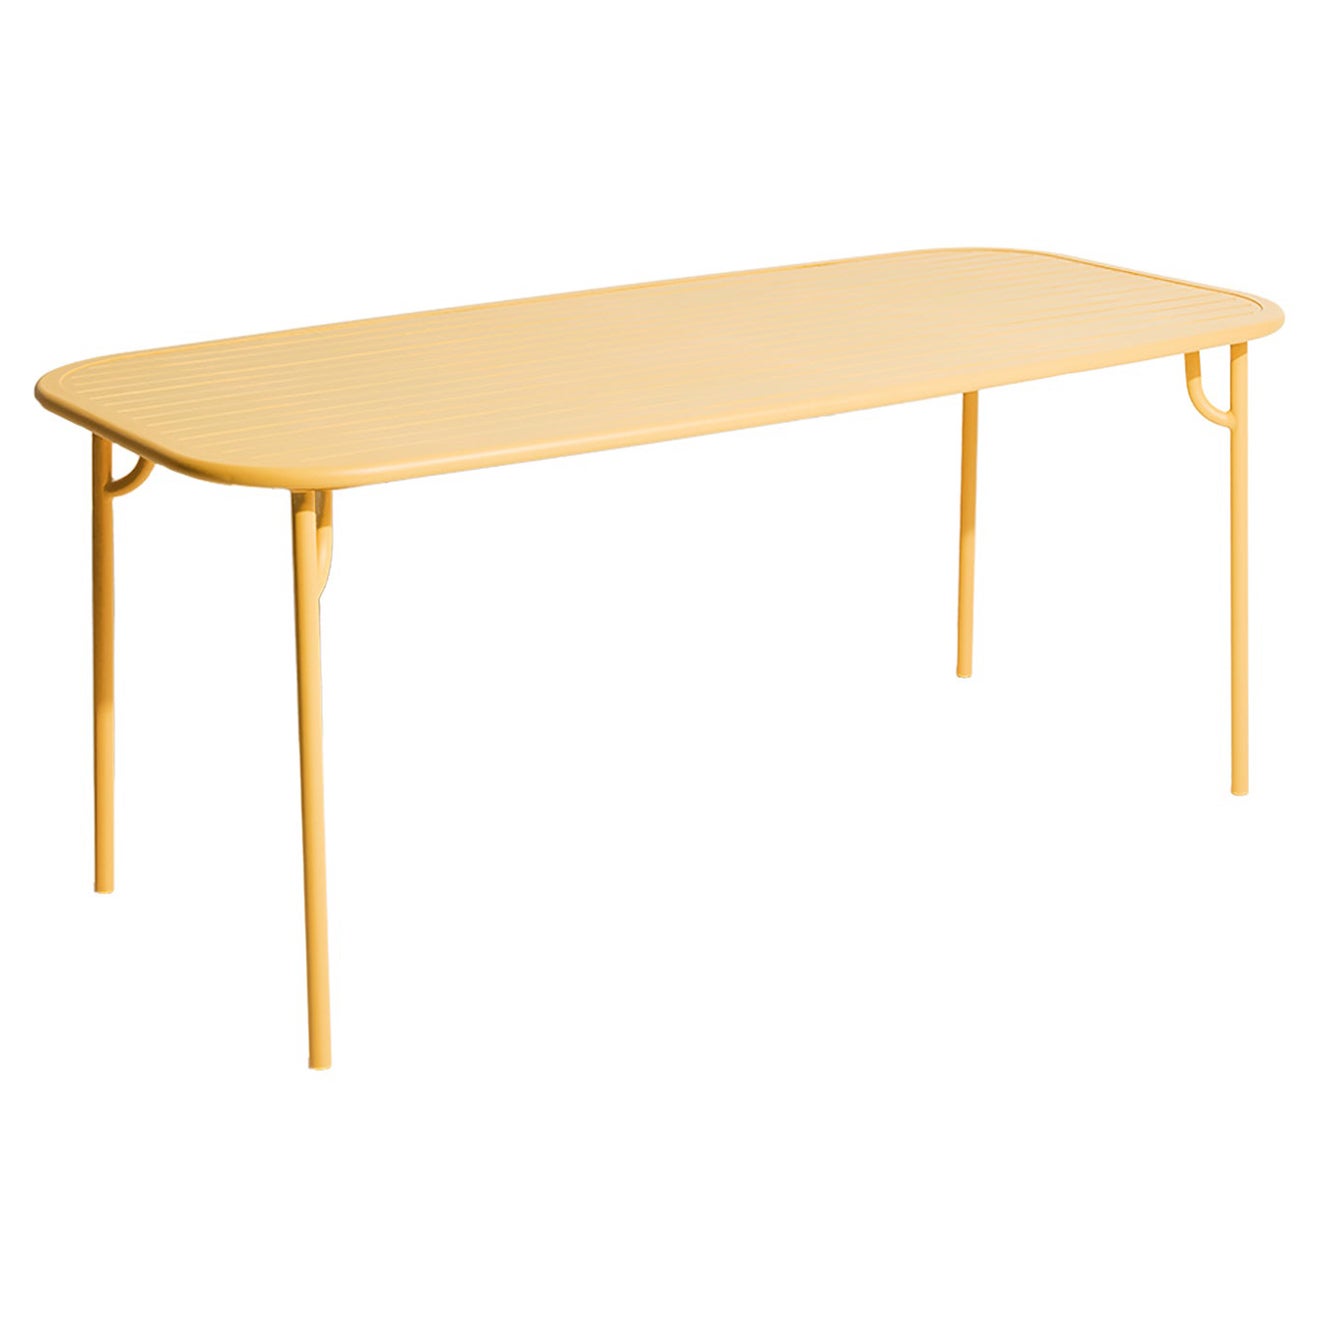 Petite Friture Week-End Medium Rectangular Dining Table in Saffron with Slats